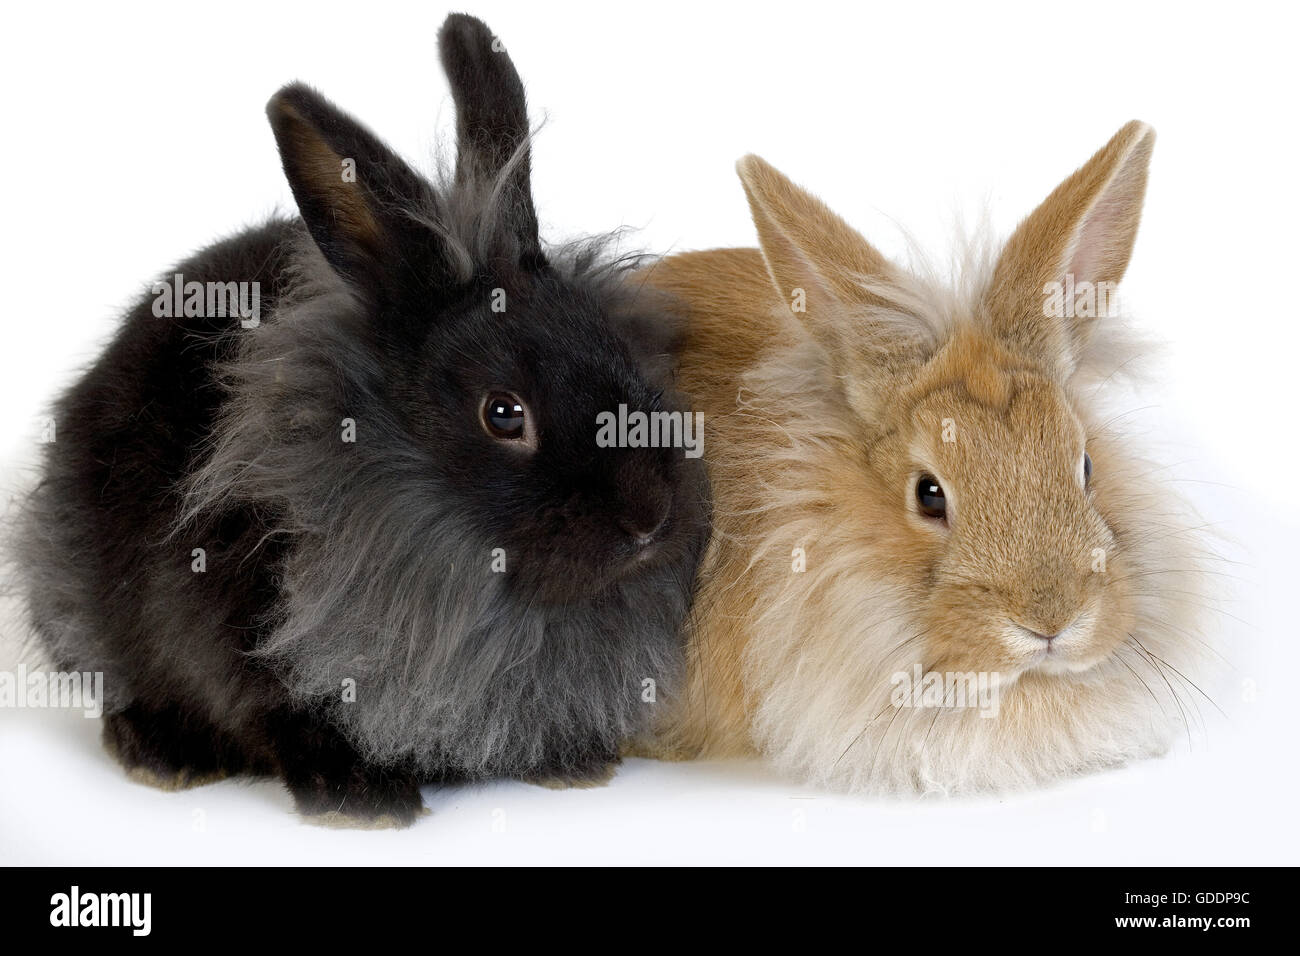 Red and Black Dwarf Rabbit against White Background Stock Photo